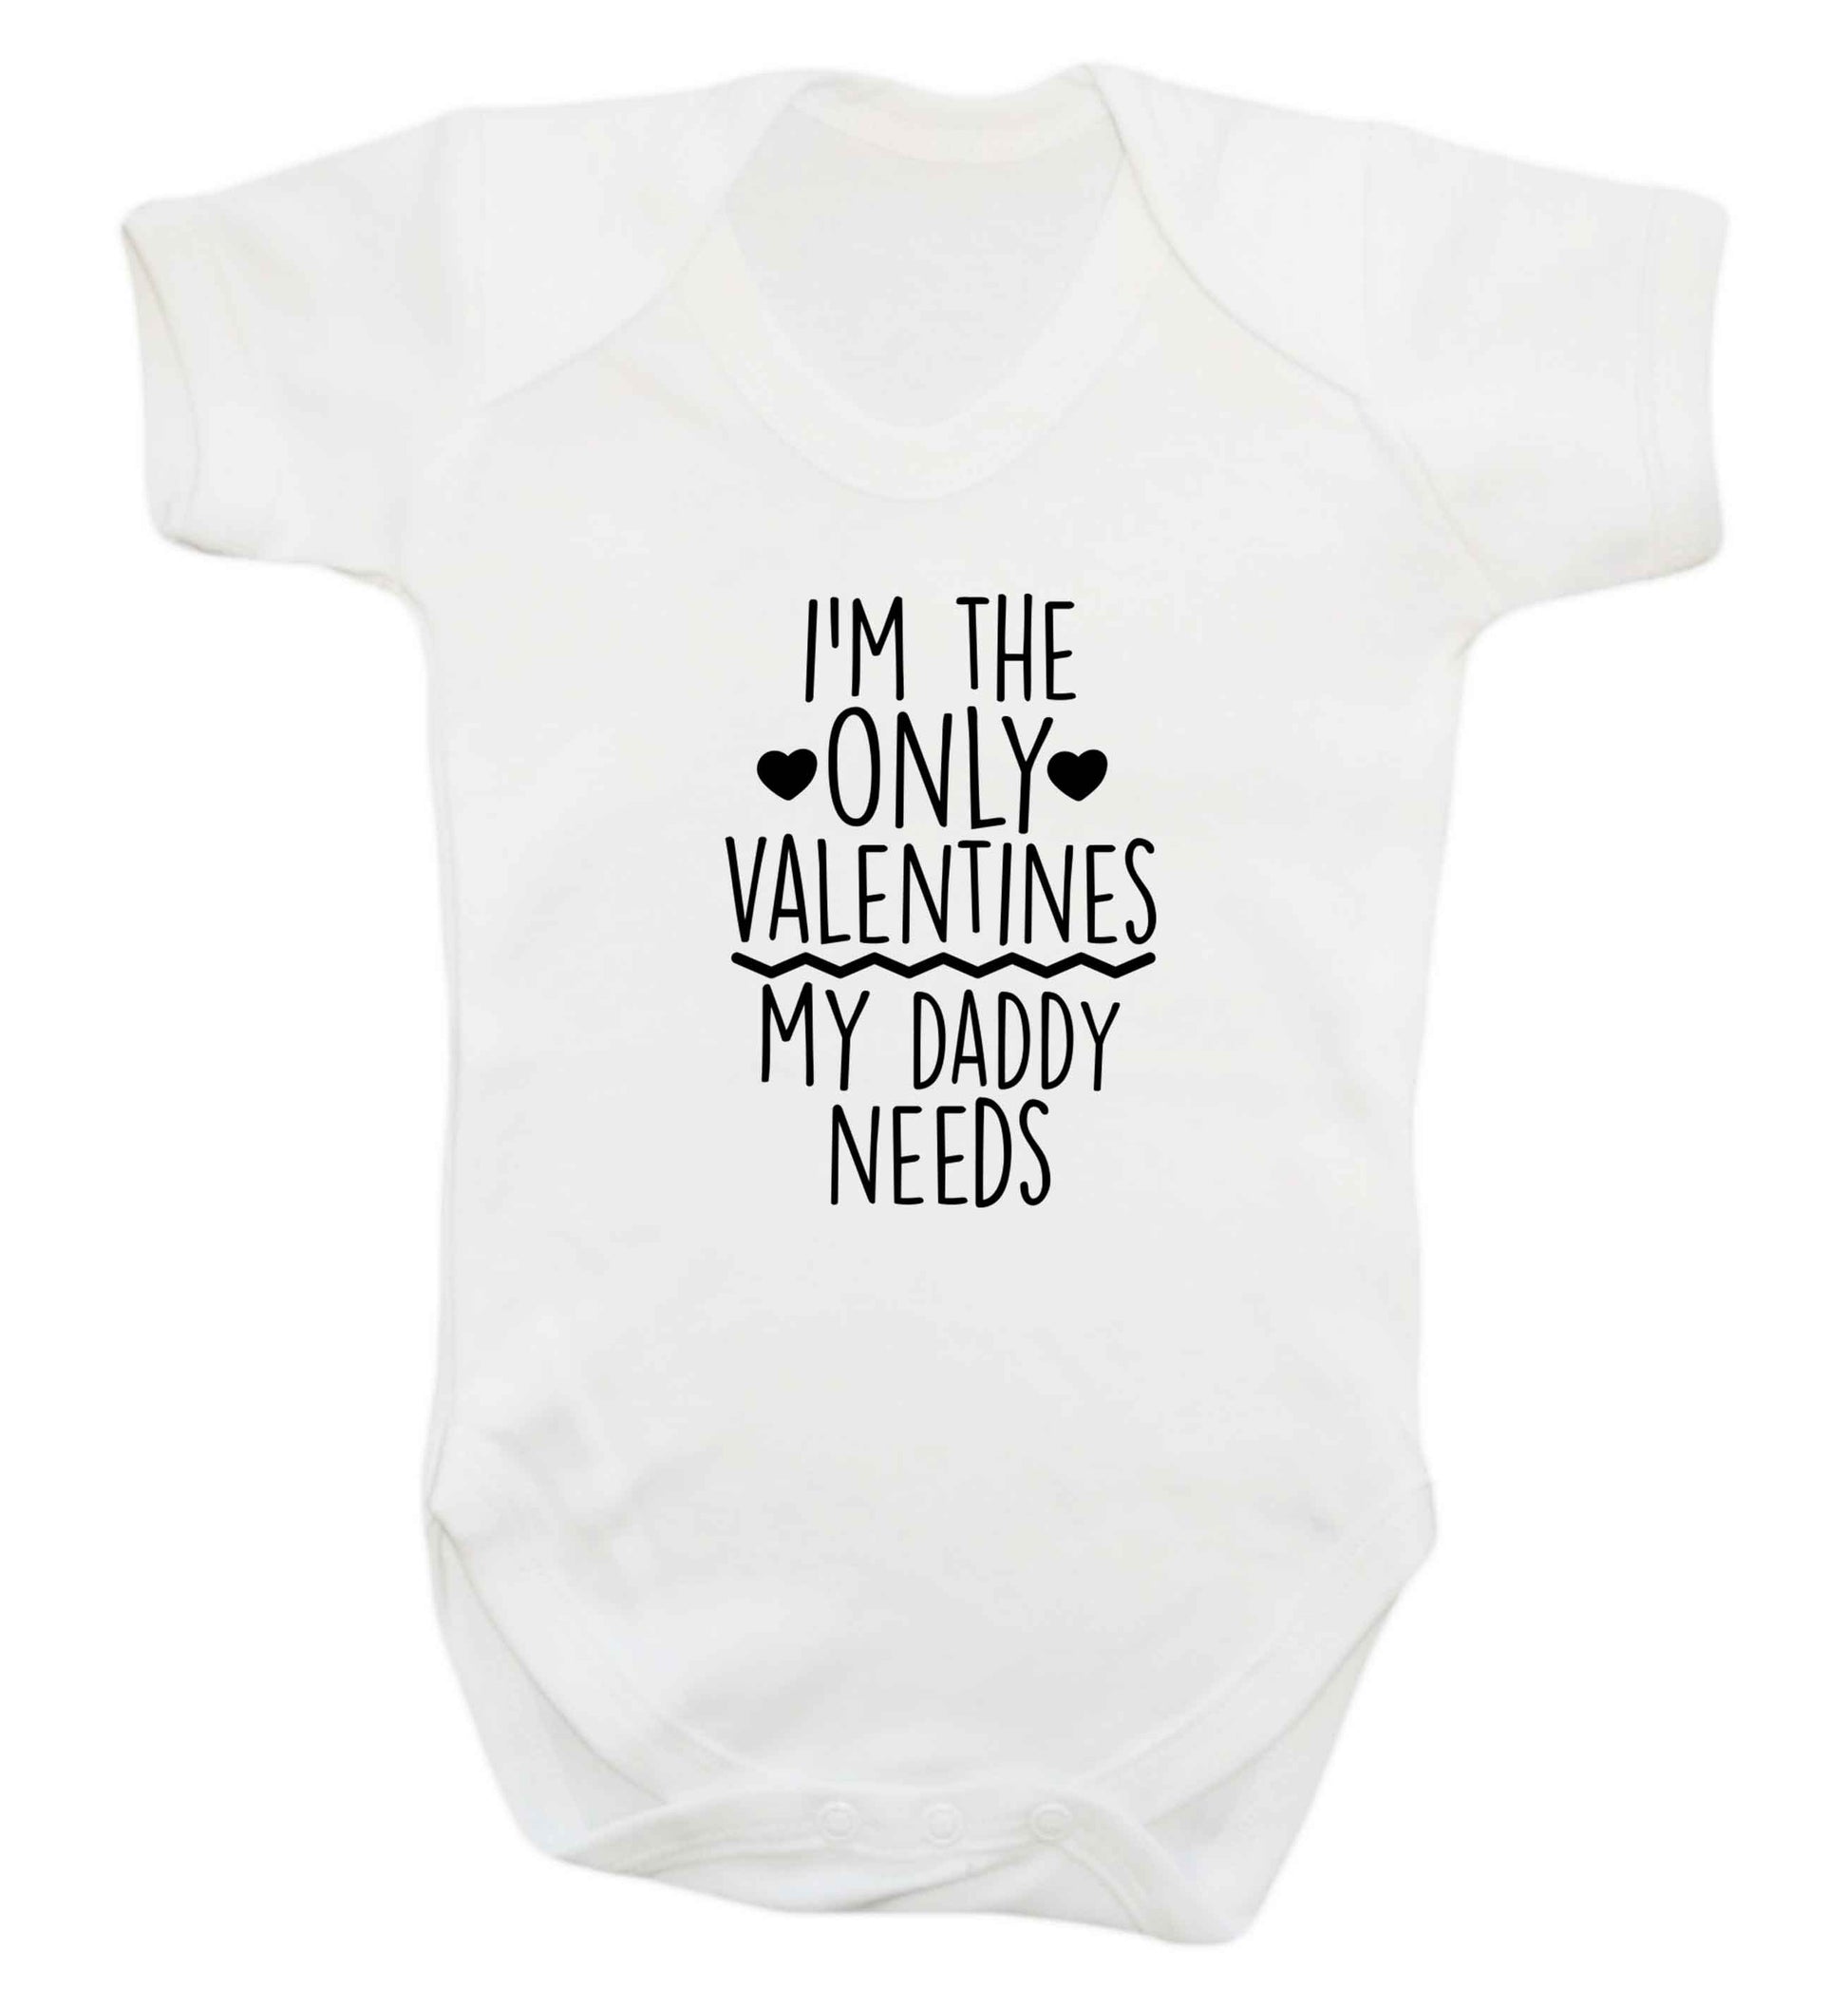 I'm the only valentines my daddy needs baby vest white 18-24 months